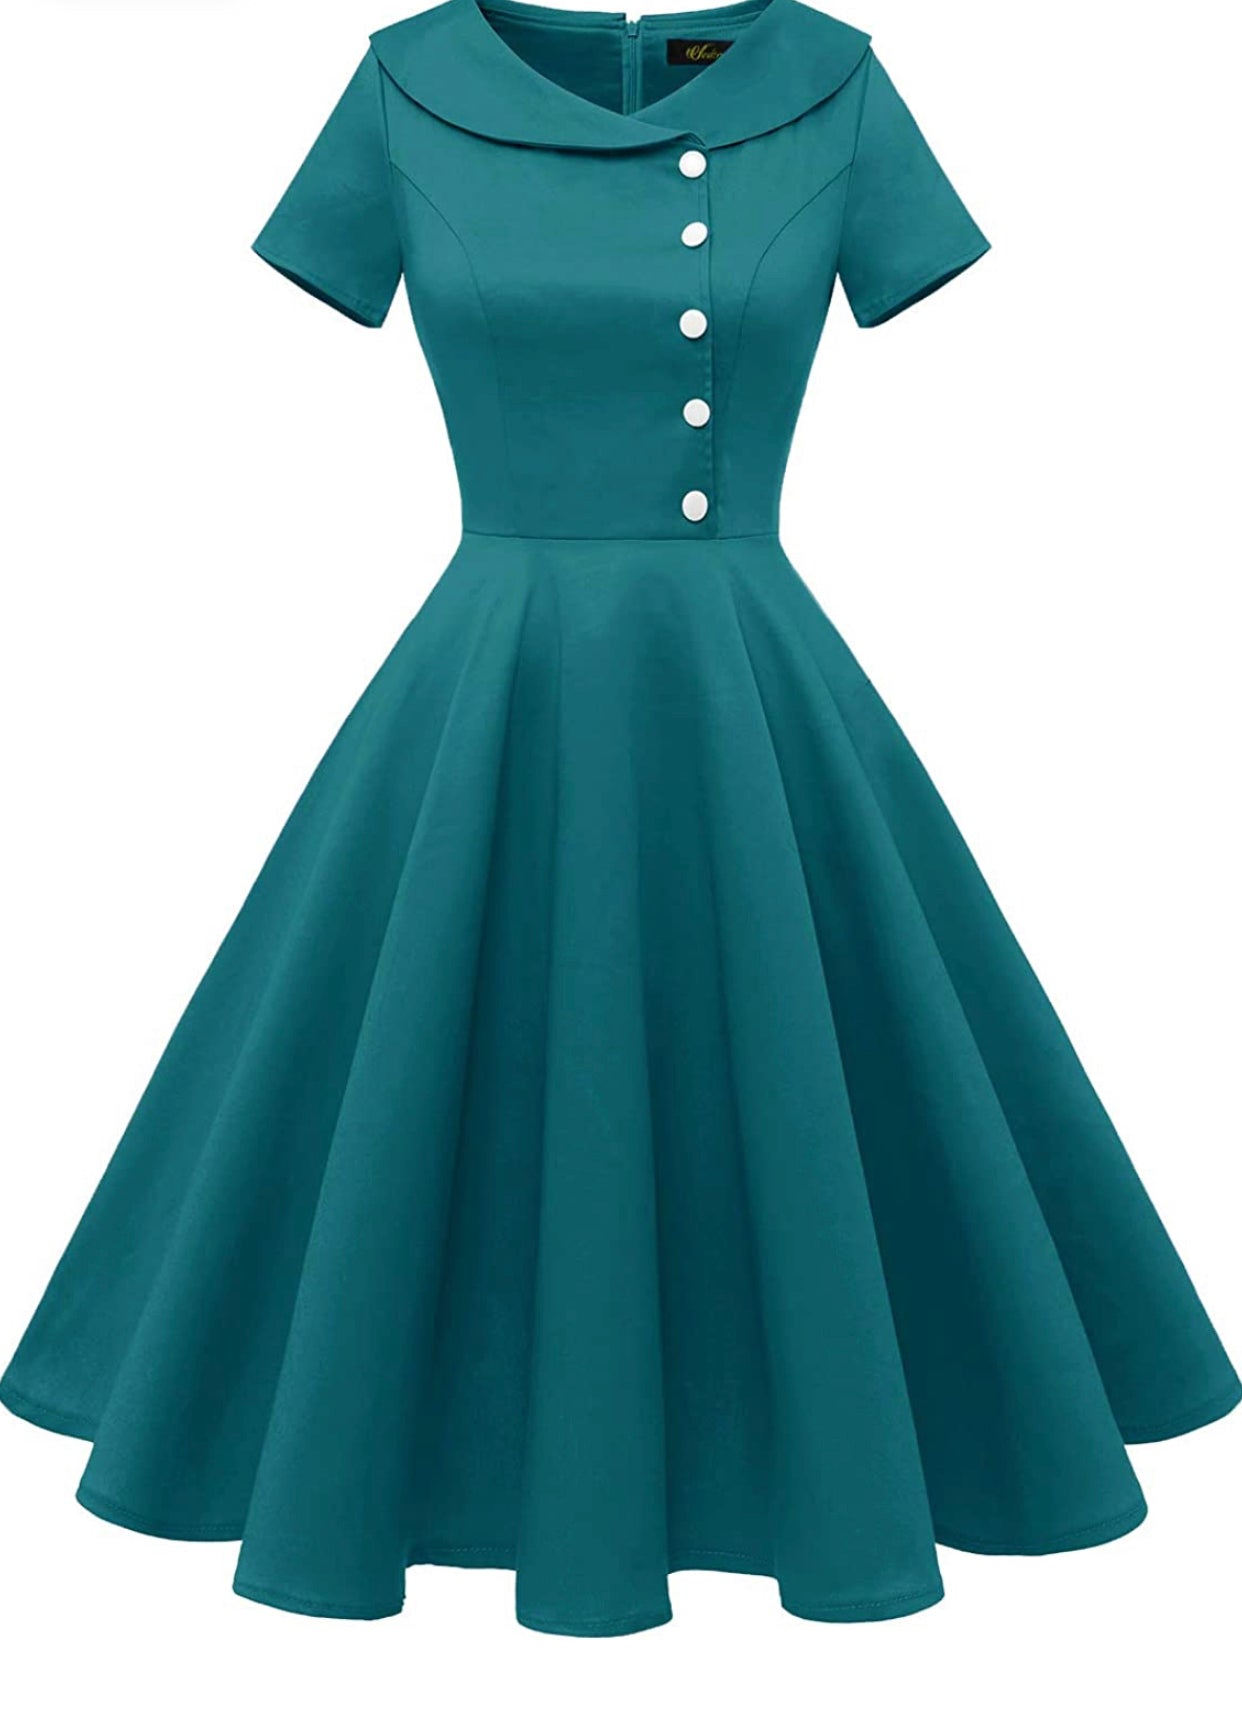 Peacock Green Audrey Style Swing Dress, Sizes XSmall - 3XLarge